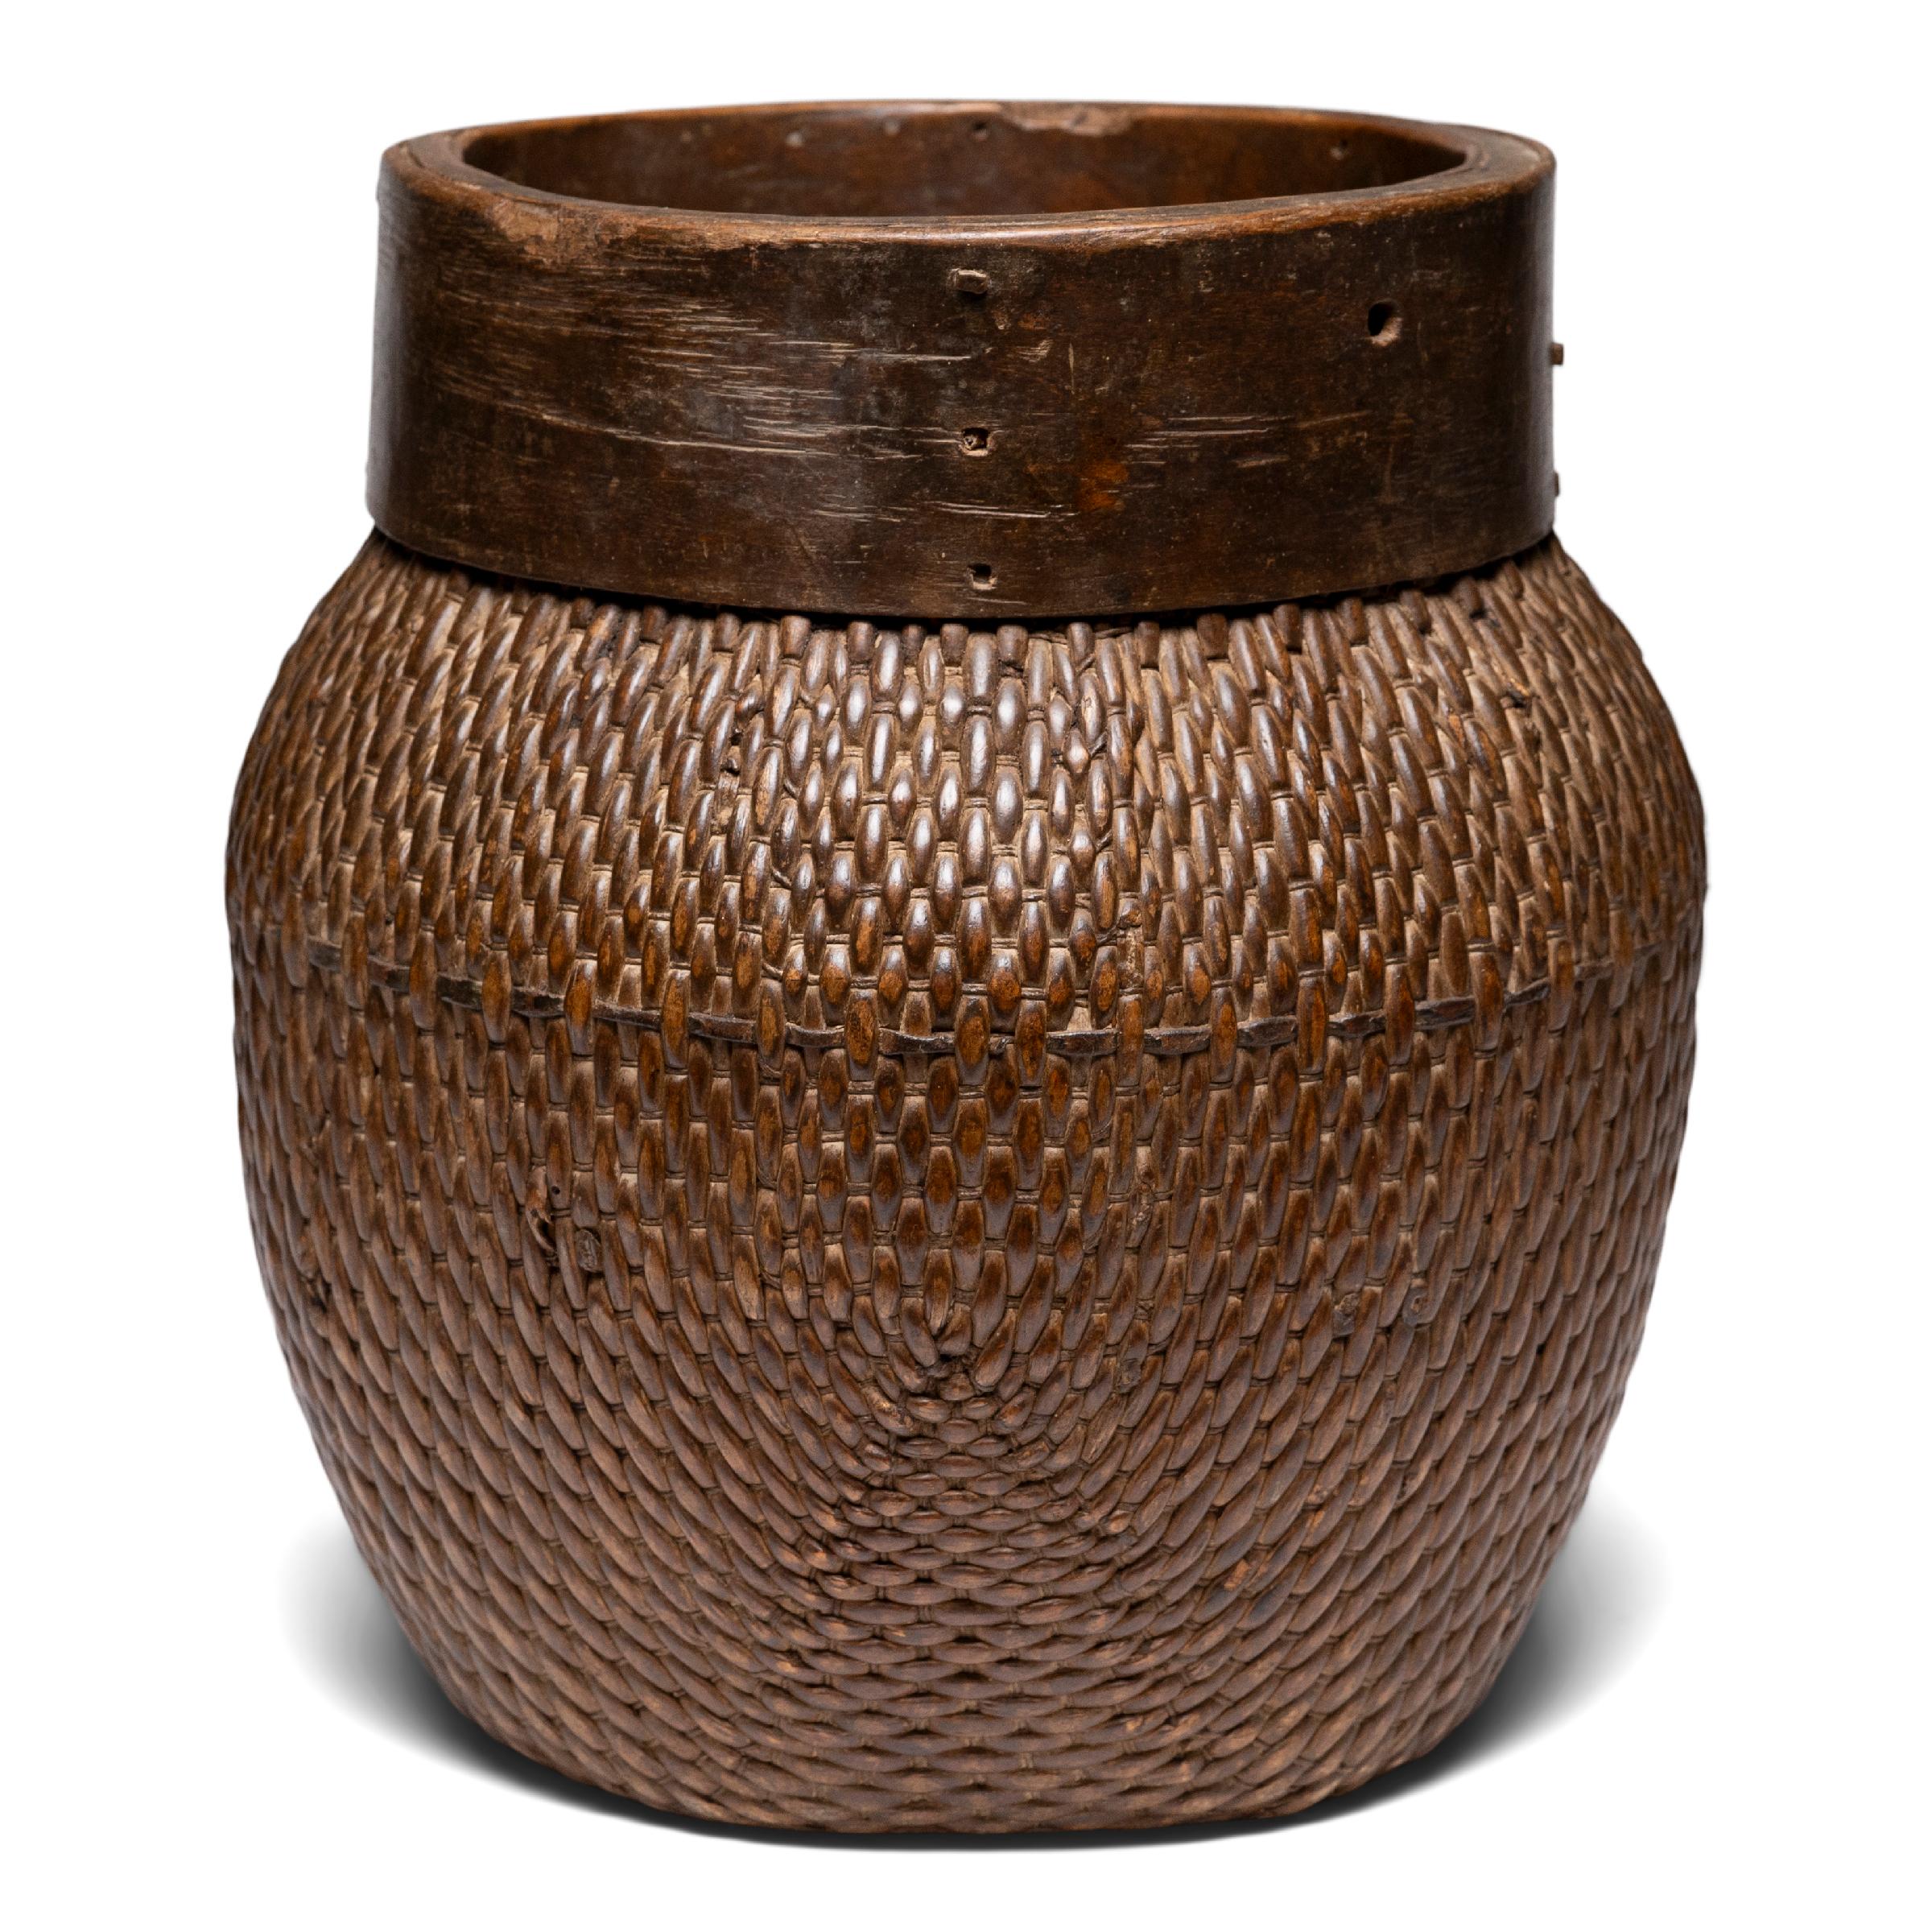 Centuries ago, a woven reed fisherman’s basket such as this would have been common in rural China as an everyday item, used until it became worn through. This hand-woven example remains in beautiful condition and features a tapered woven body